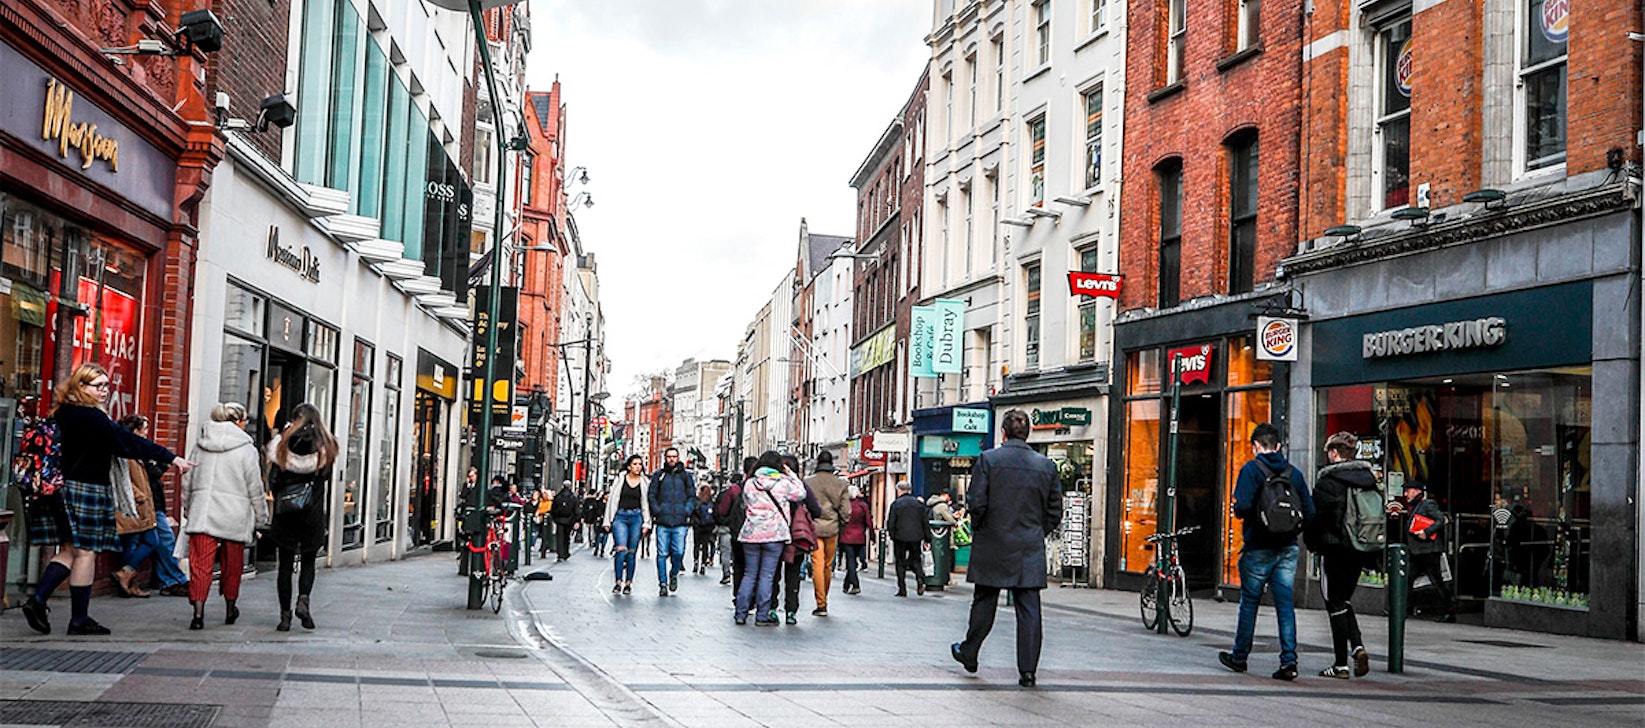 Unique partnership with Mastercard delivers new insights into resurgent Dublin economy